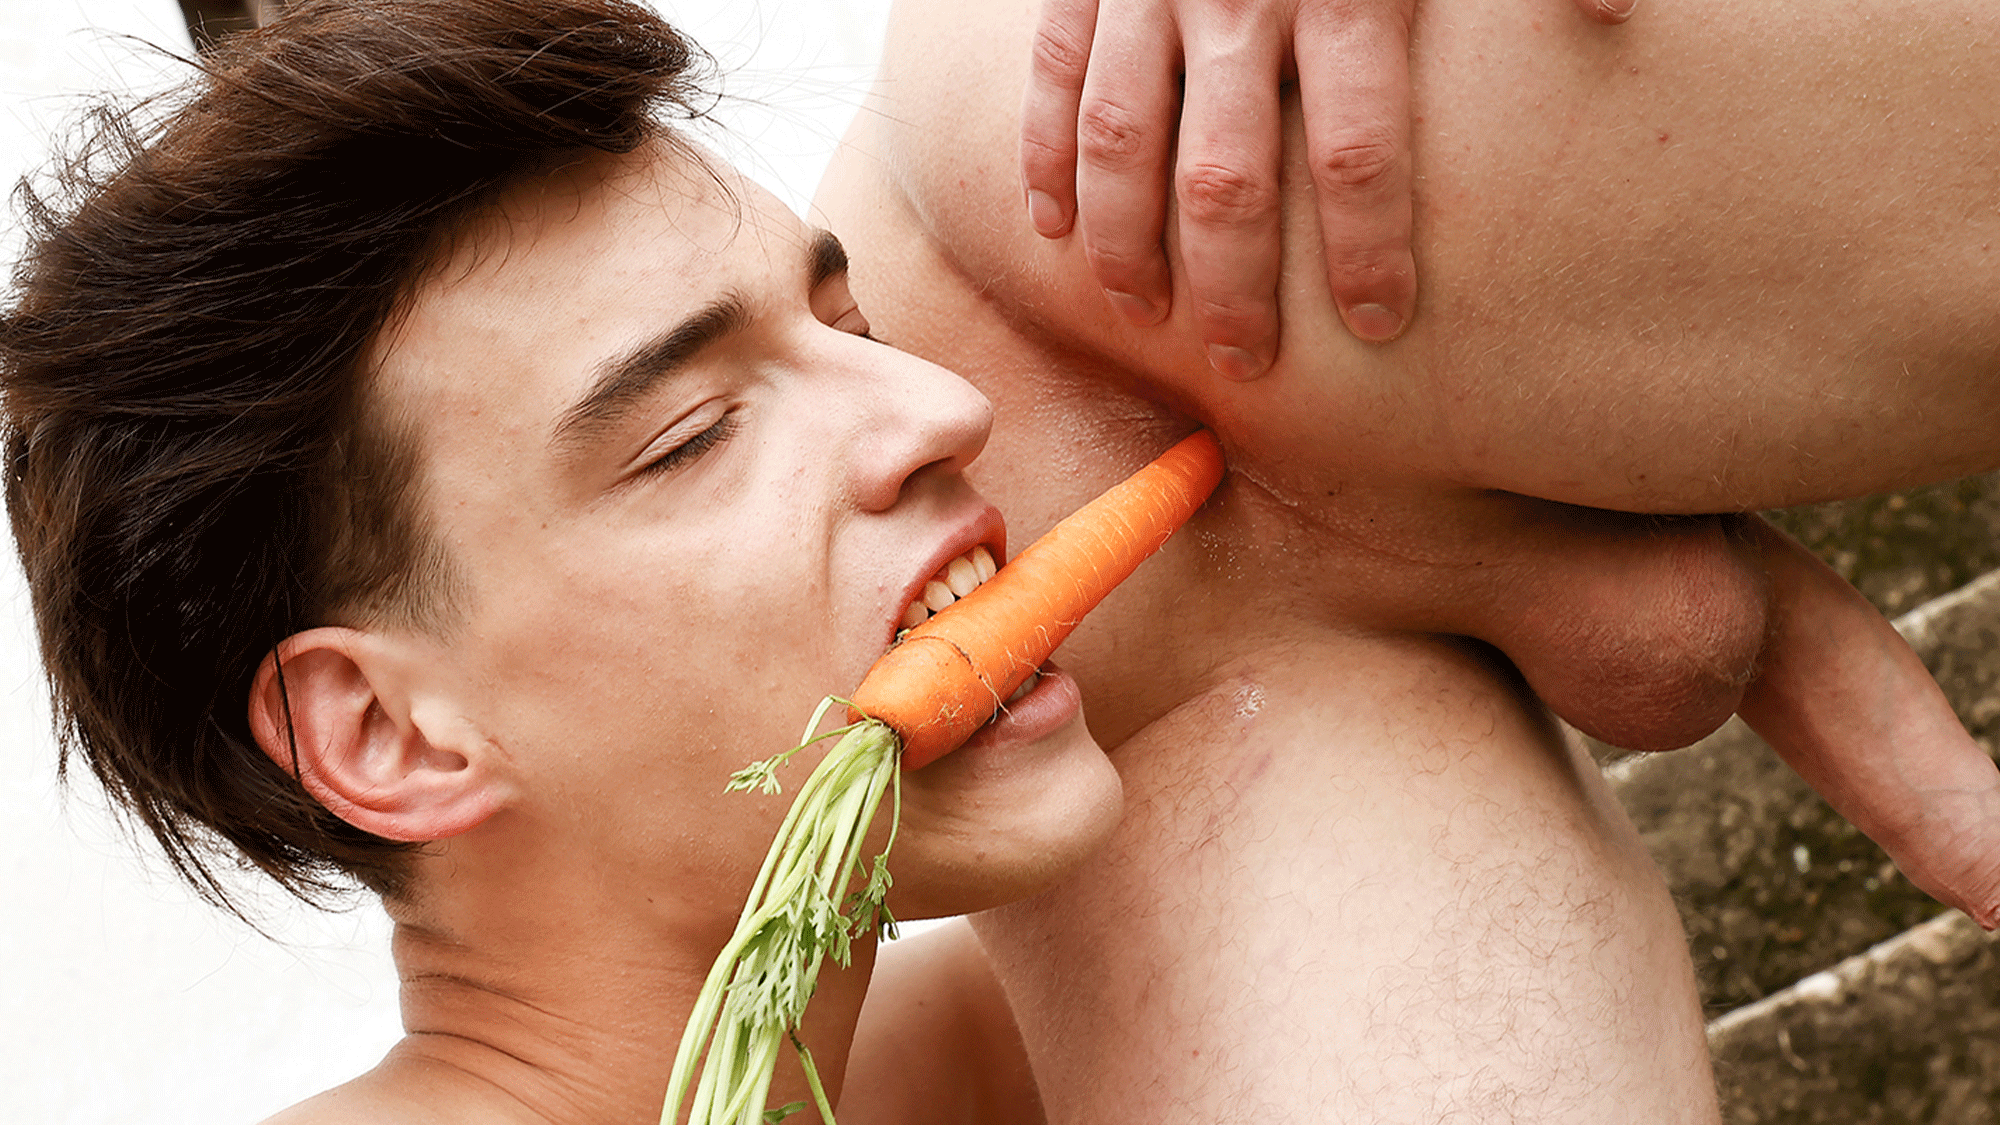 Apparently We Re Putting Carrots In Our Butts Now Thesword Com